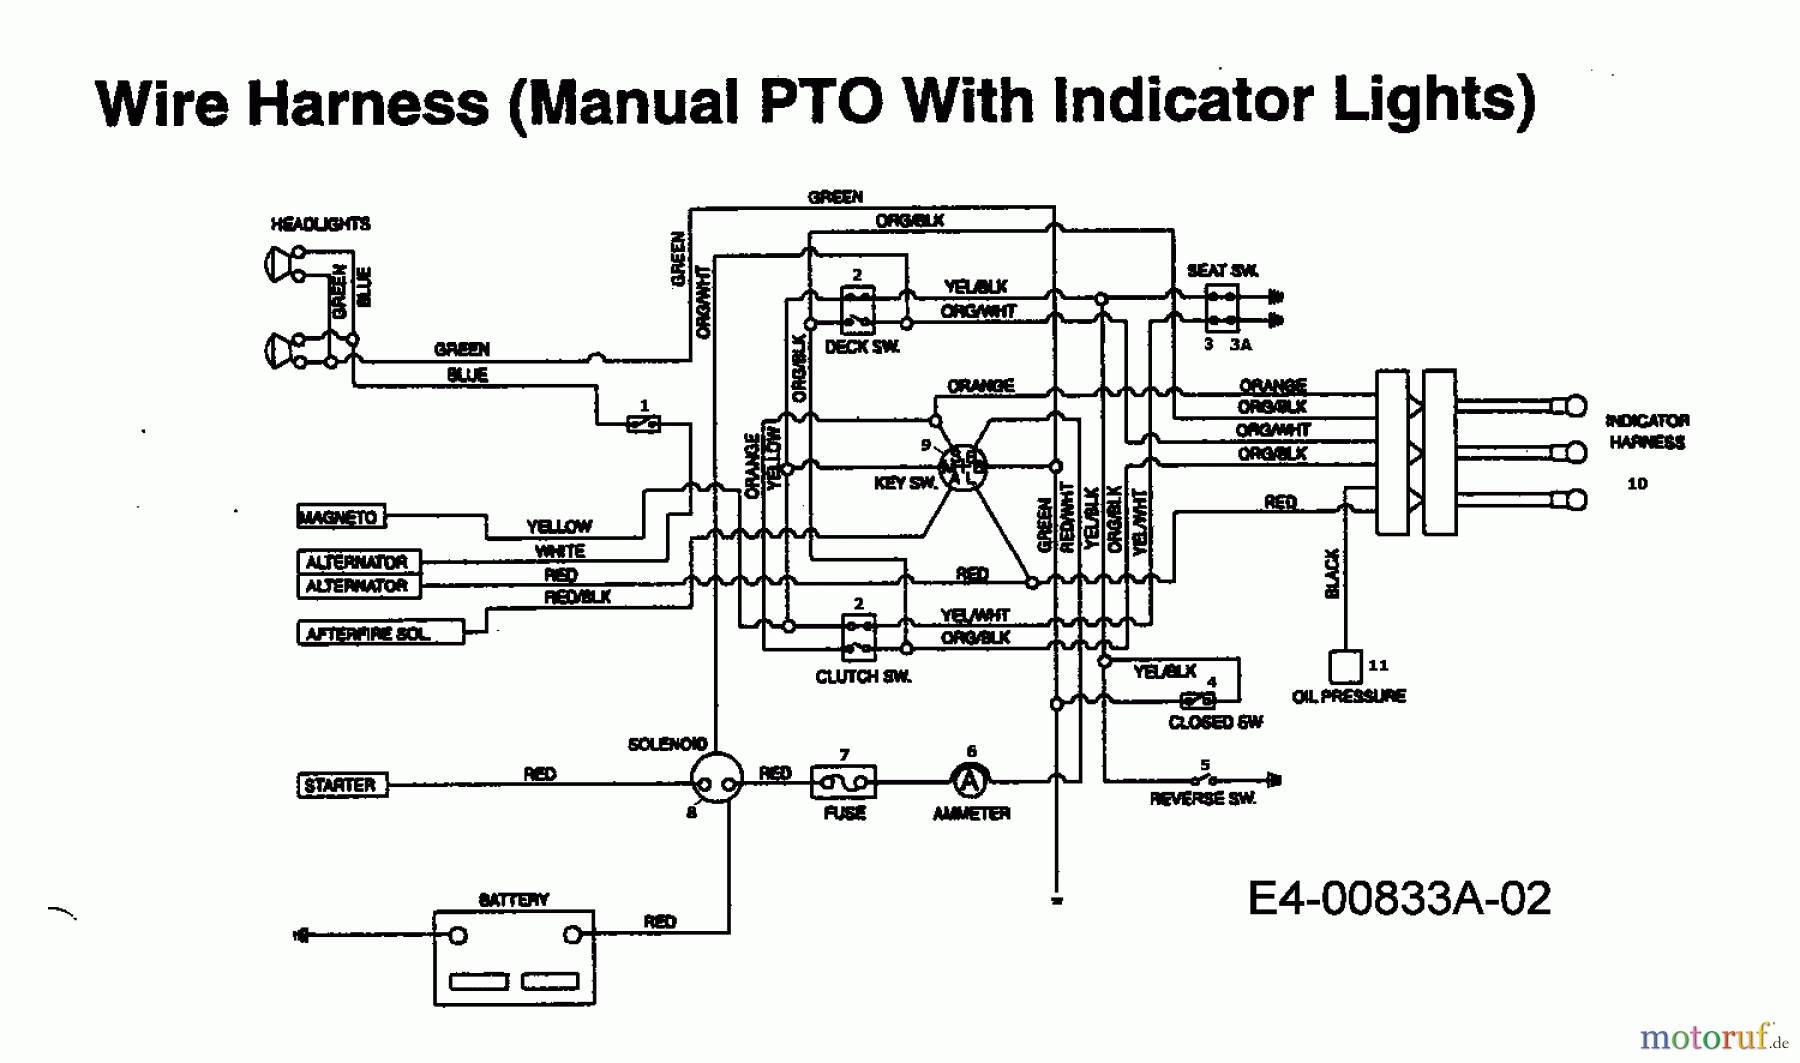  MTD Lawn tractors EH/165 13CO798N678  (1999) Wiring diagram with indicator lights